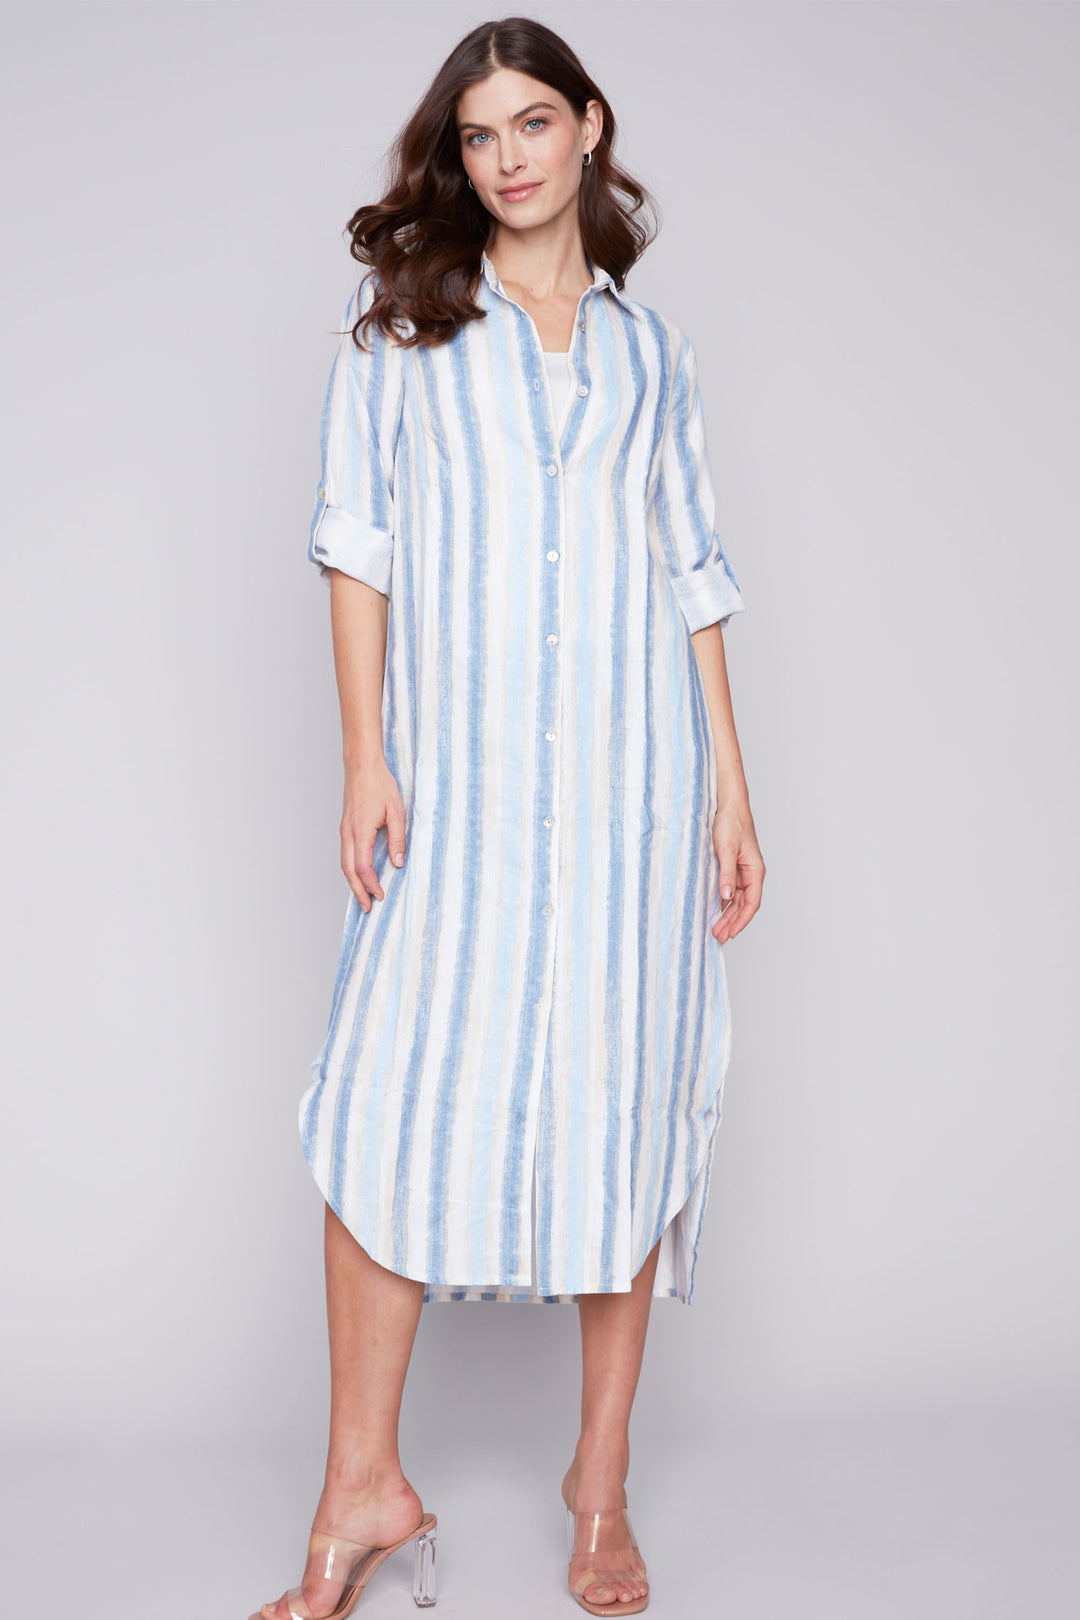 This striped duster dress effortlessly combines easy spring style and classic elegance with its airy, lightweight design and fabric, roll-up sleeves.